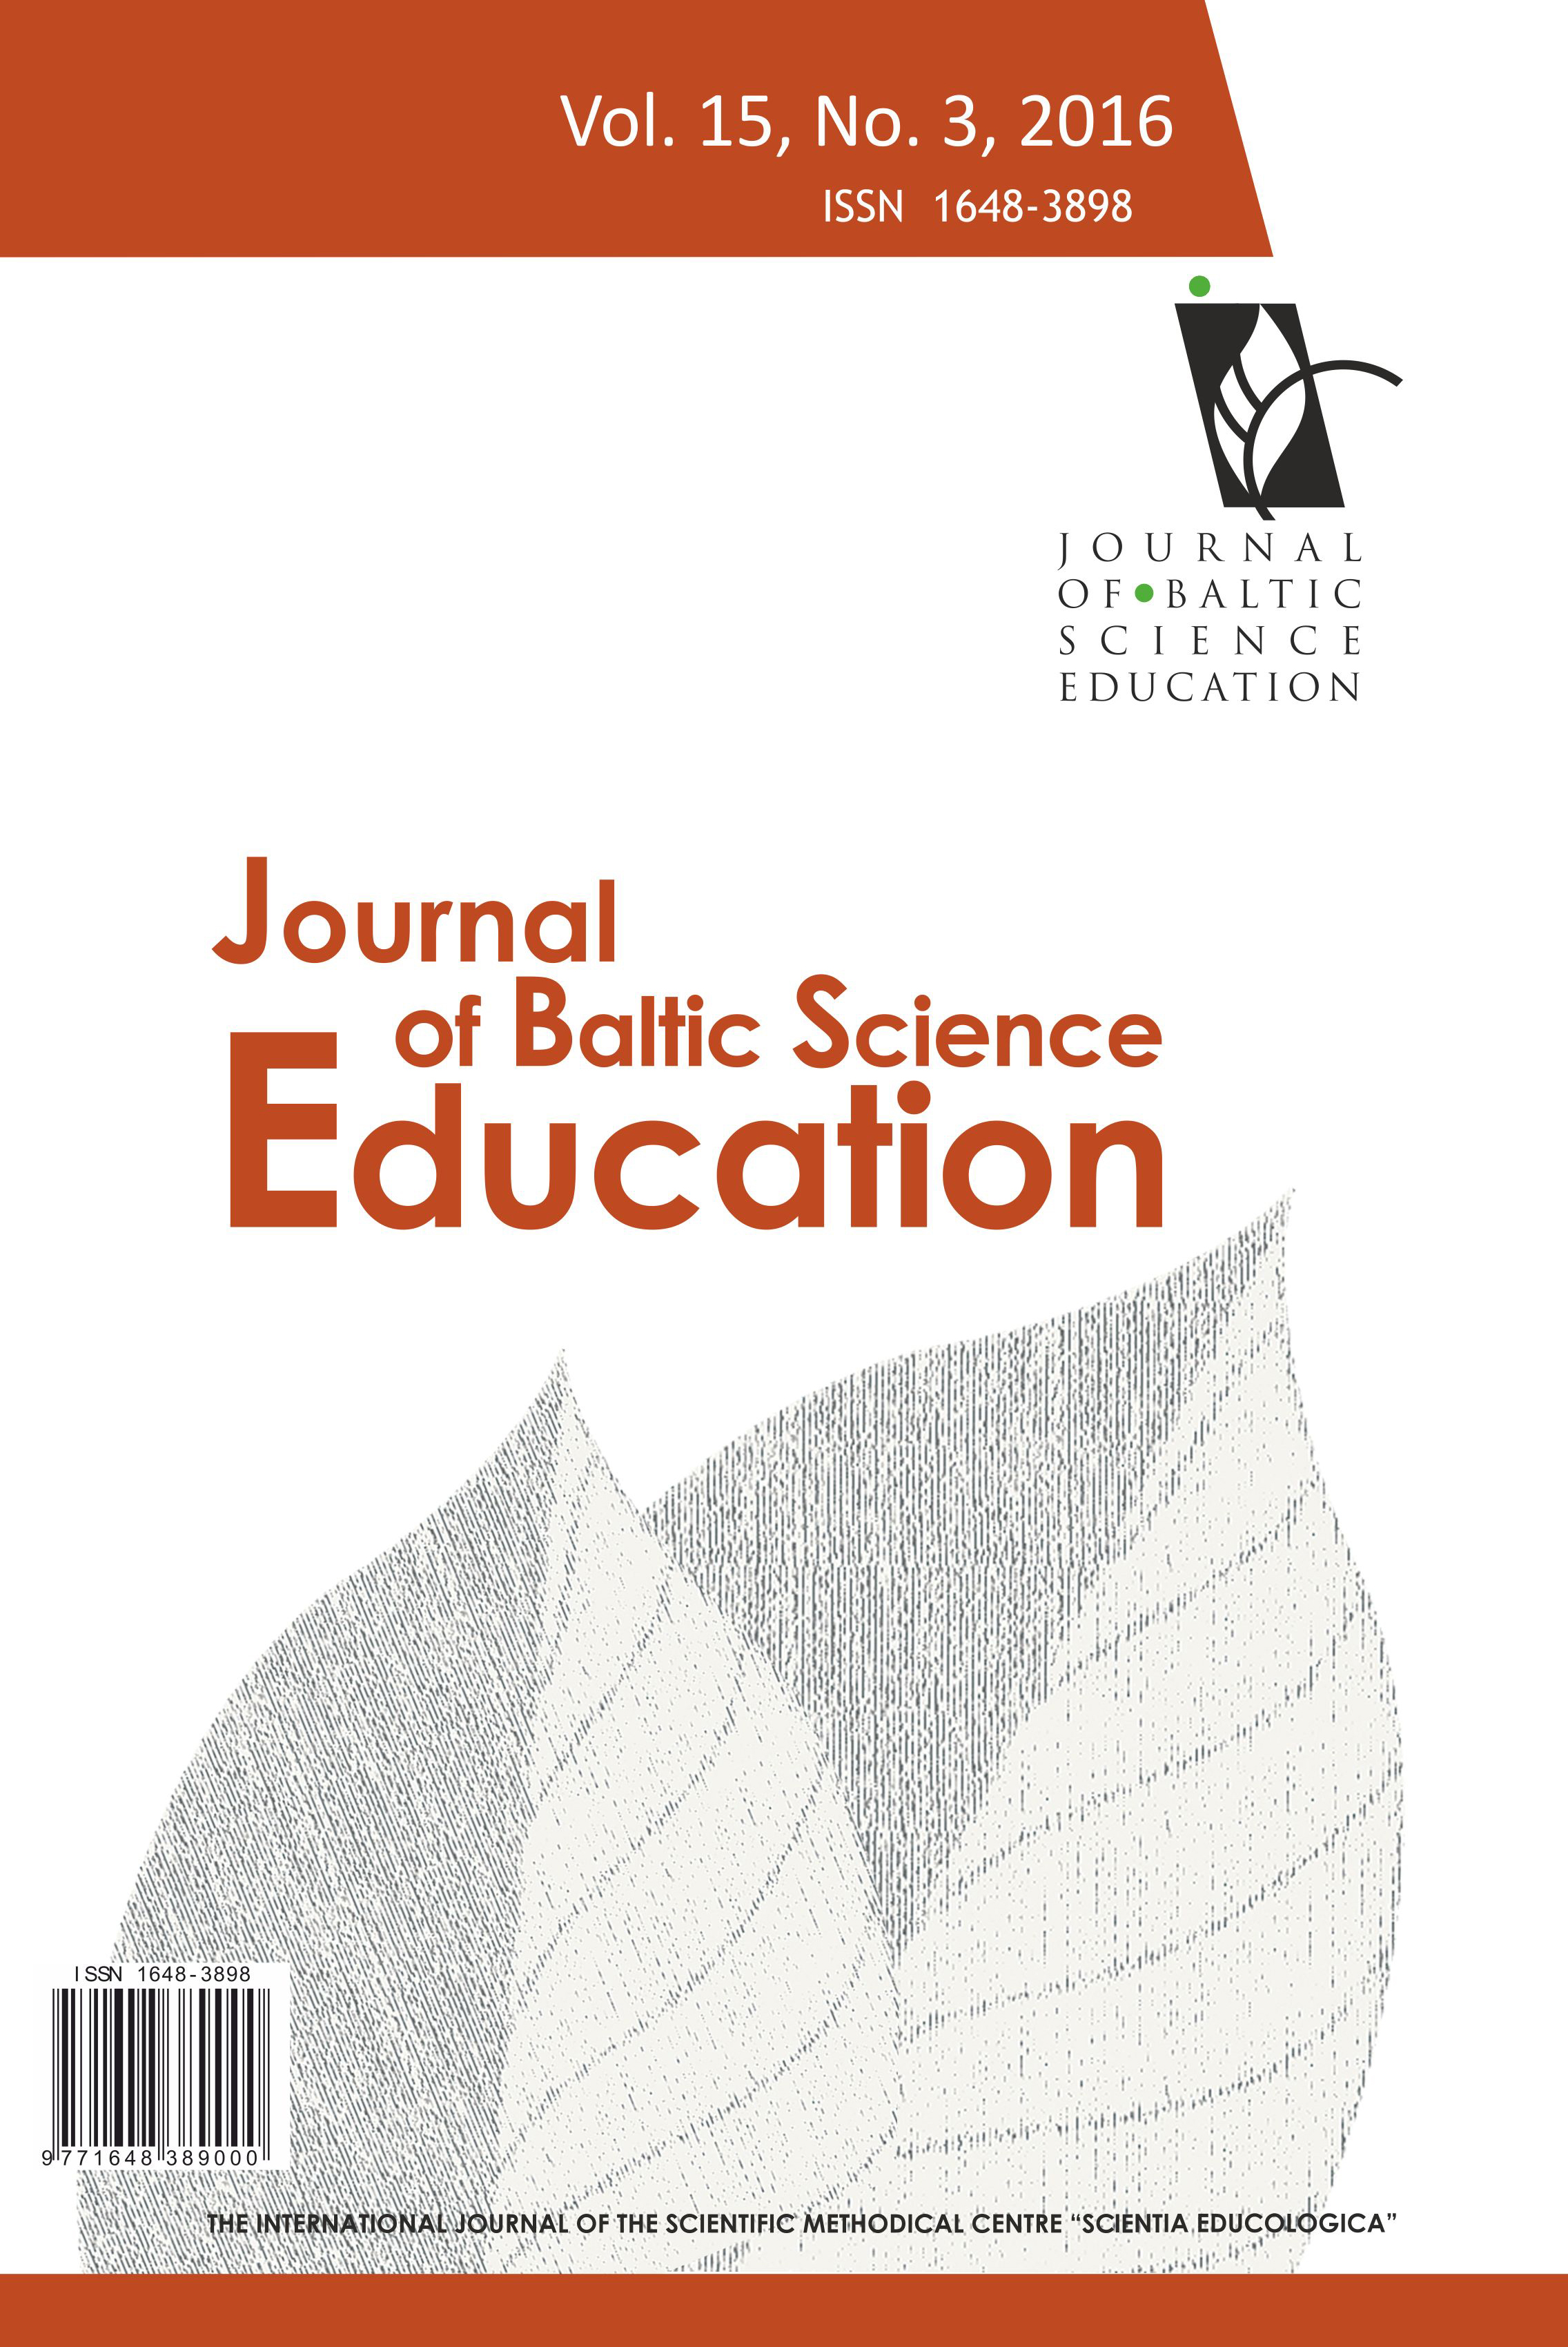 CONTEXT-BASED QUESTIONS IN SCIENCE EDUCATION: THEIR EFFECTS ON TEST ANXIETY AND SCIENCE ACHIEVEMENT IN RELATION TO THE GENDER OF SECONDARY SCHOOL STUDENTS